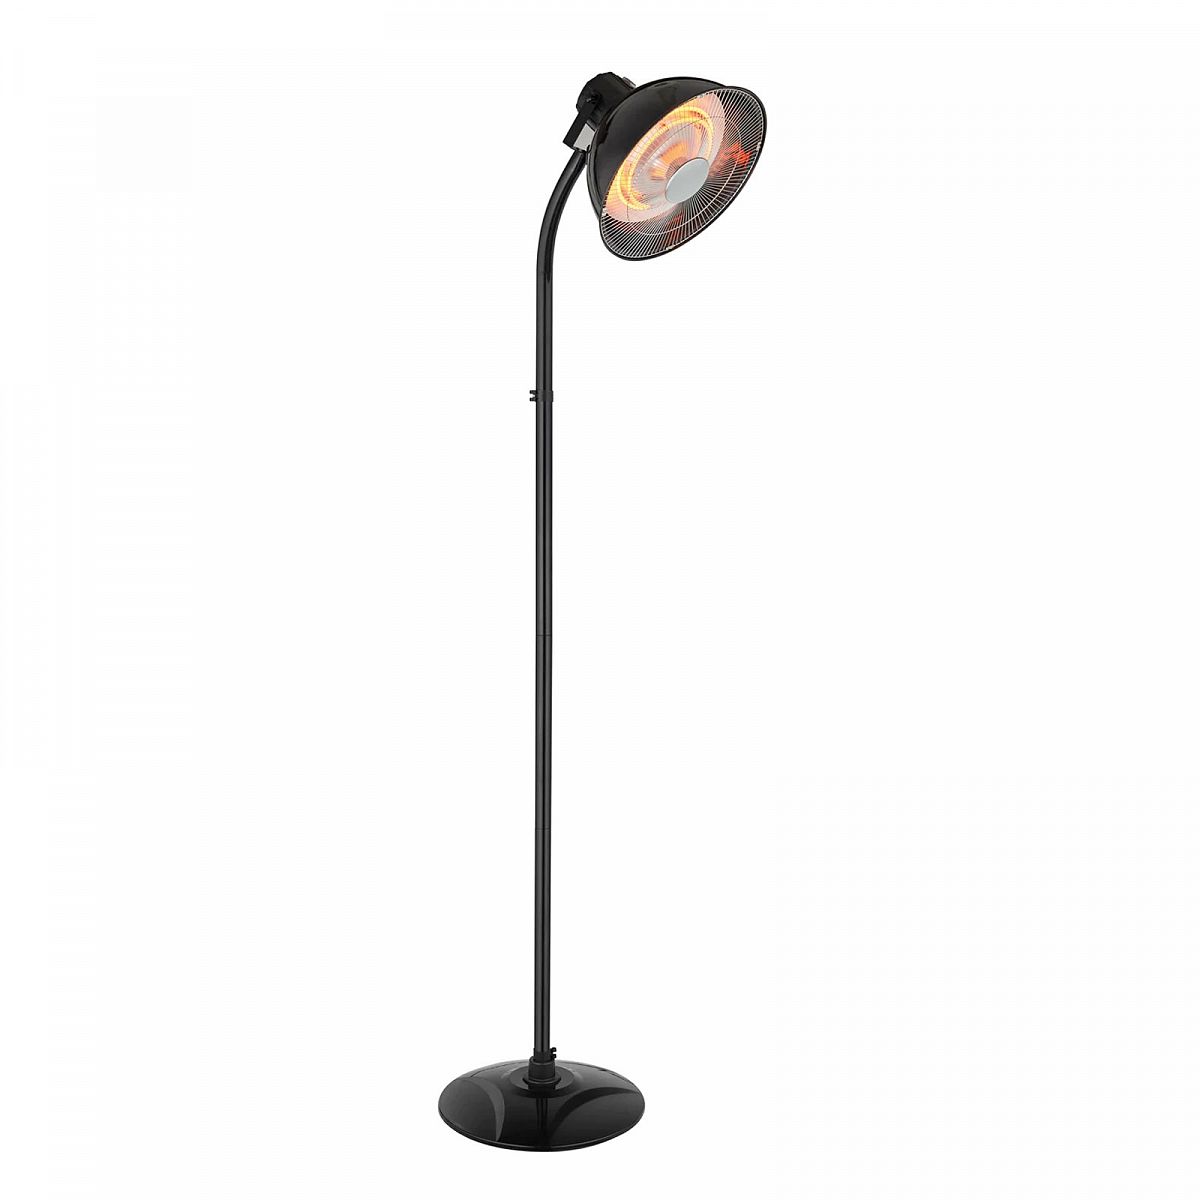 Agate Outdoor Floor Standing Patio Heater by Radiant